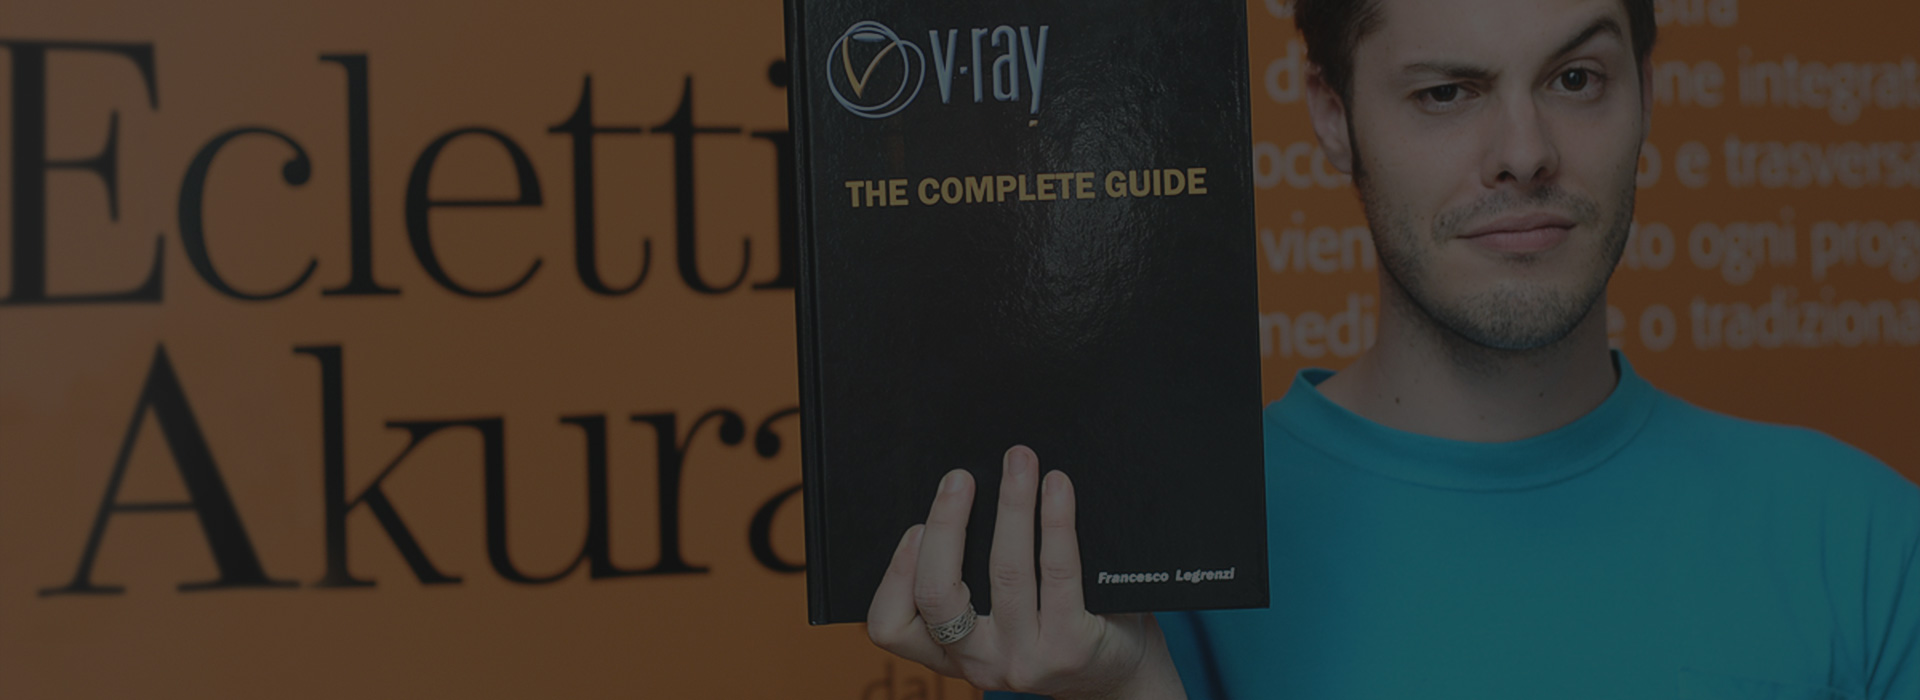 Vray The Complete Guide